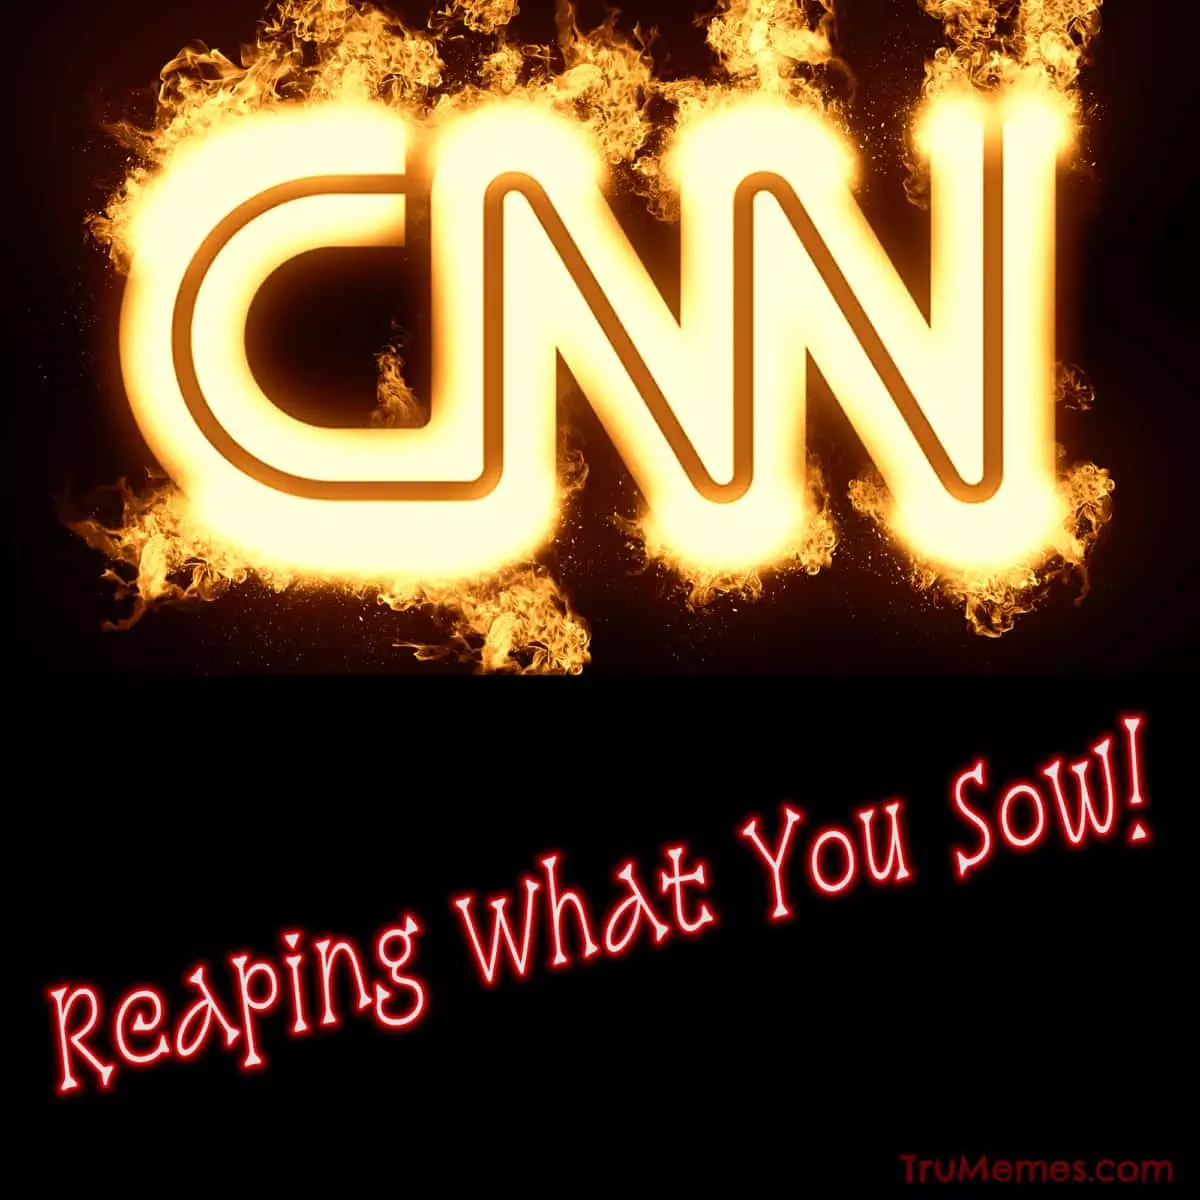 CNN On Fire Reaping What You Sow-2